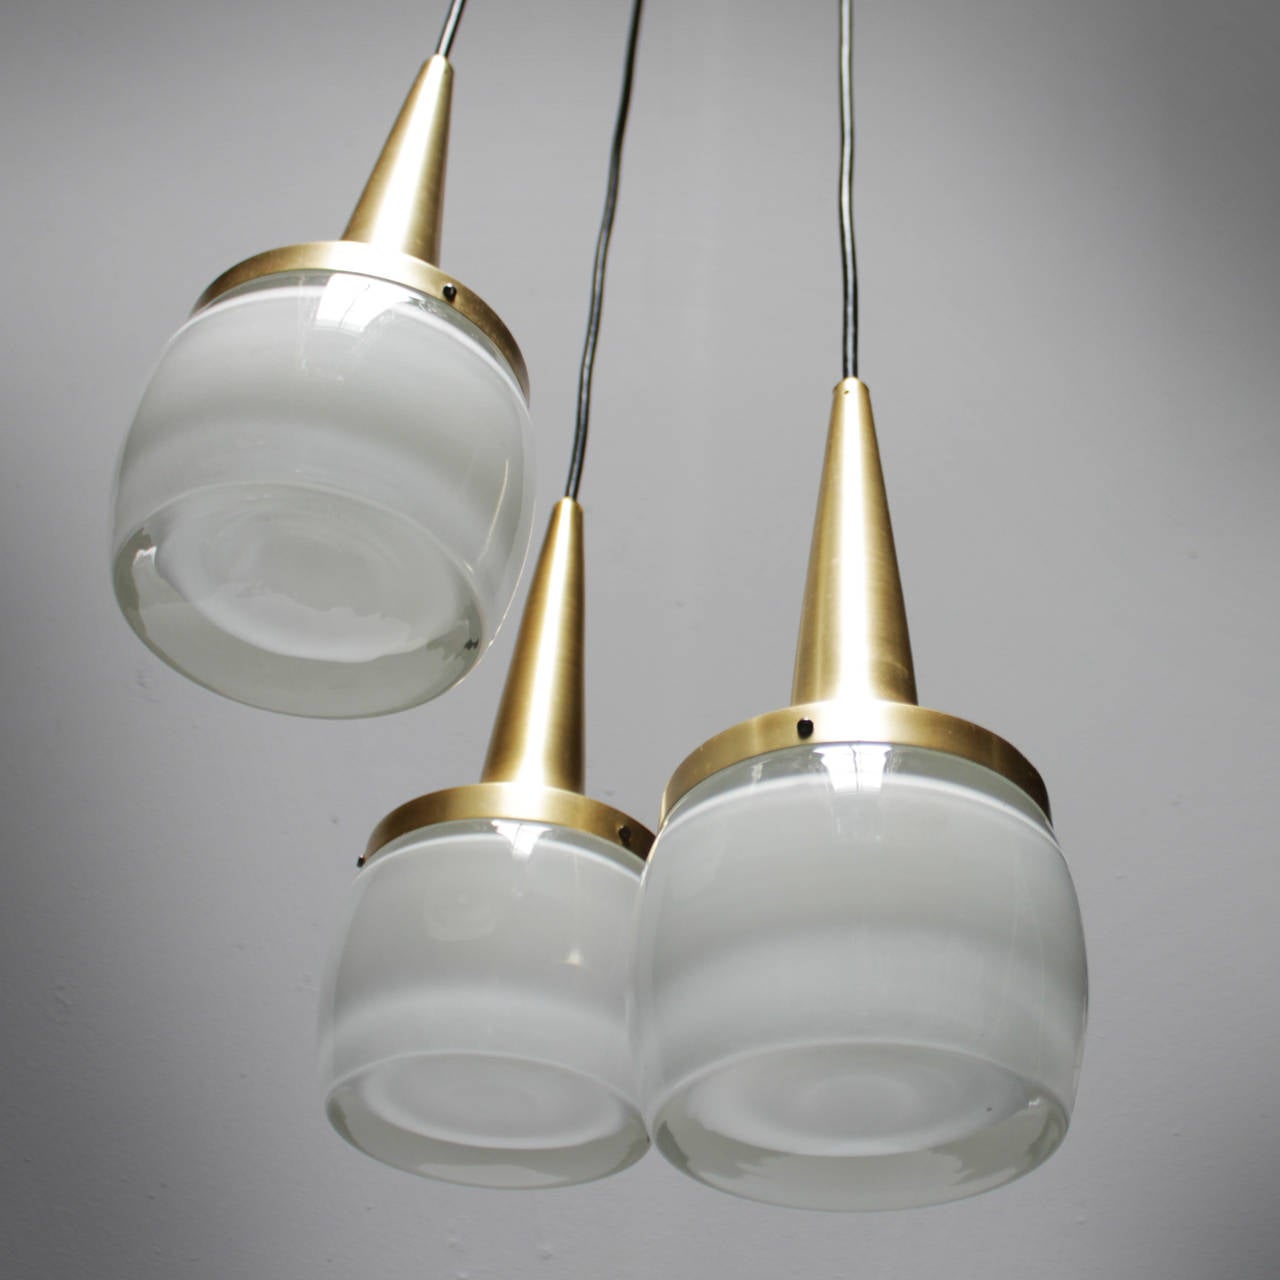 Brushed Fixture with Three Staff Pendants, Germany